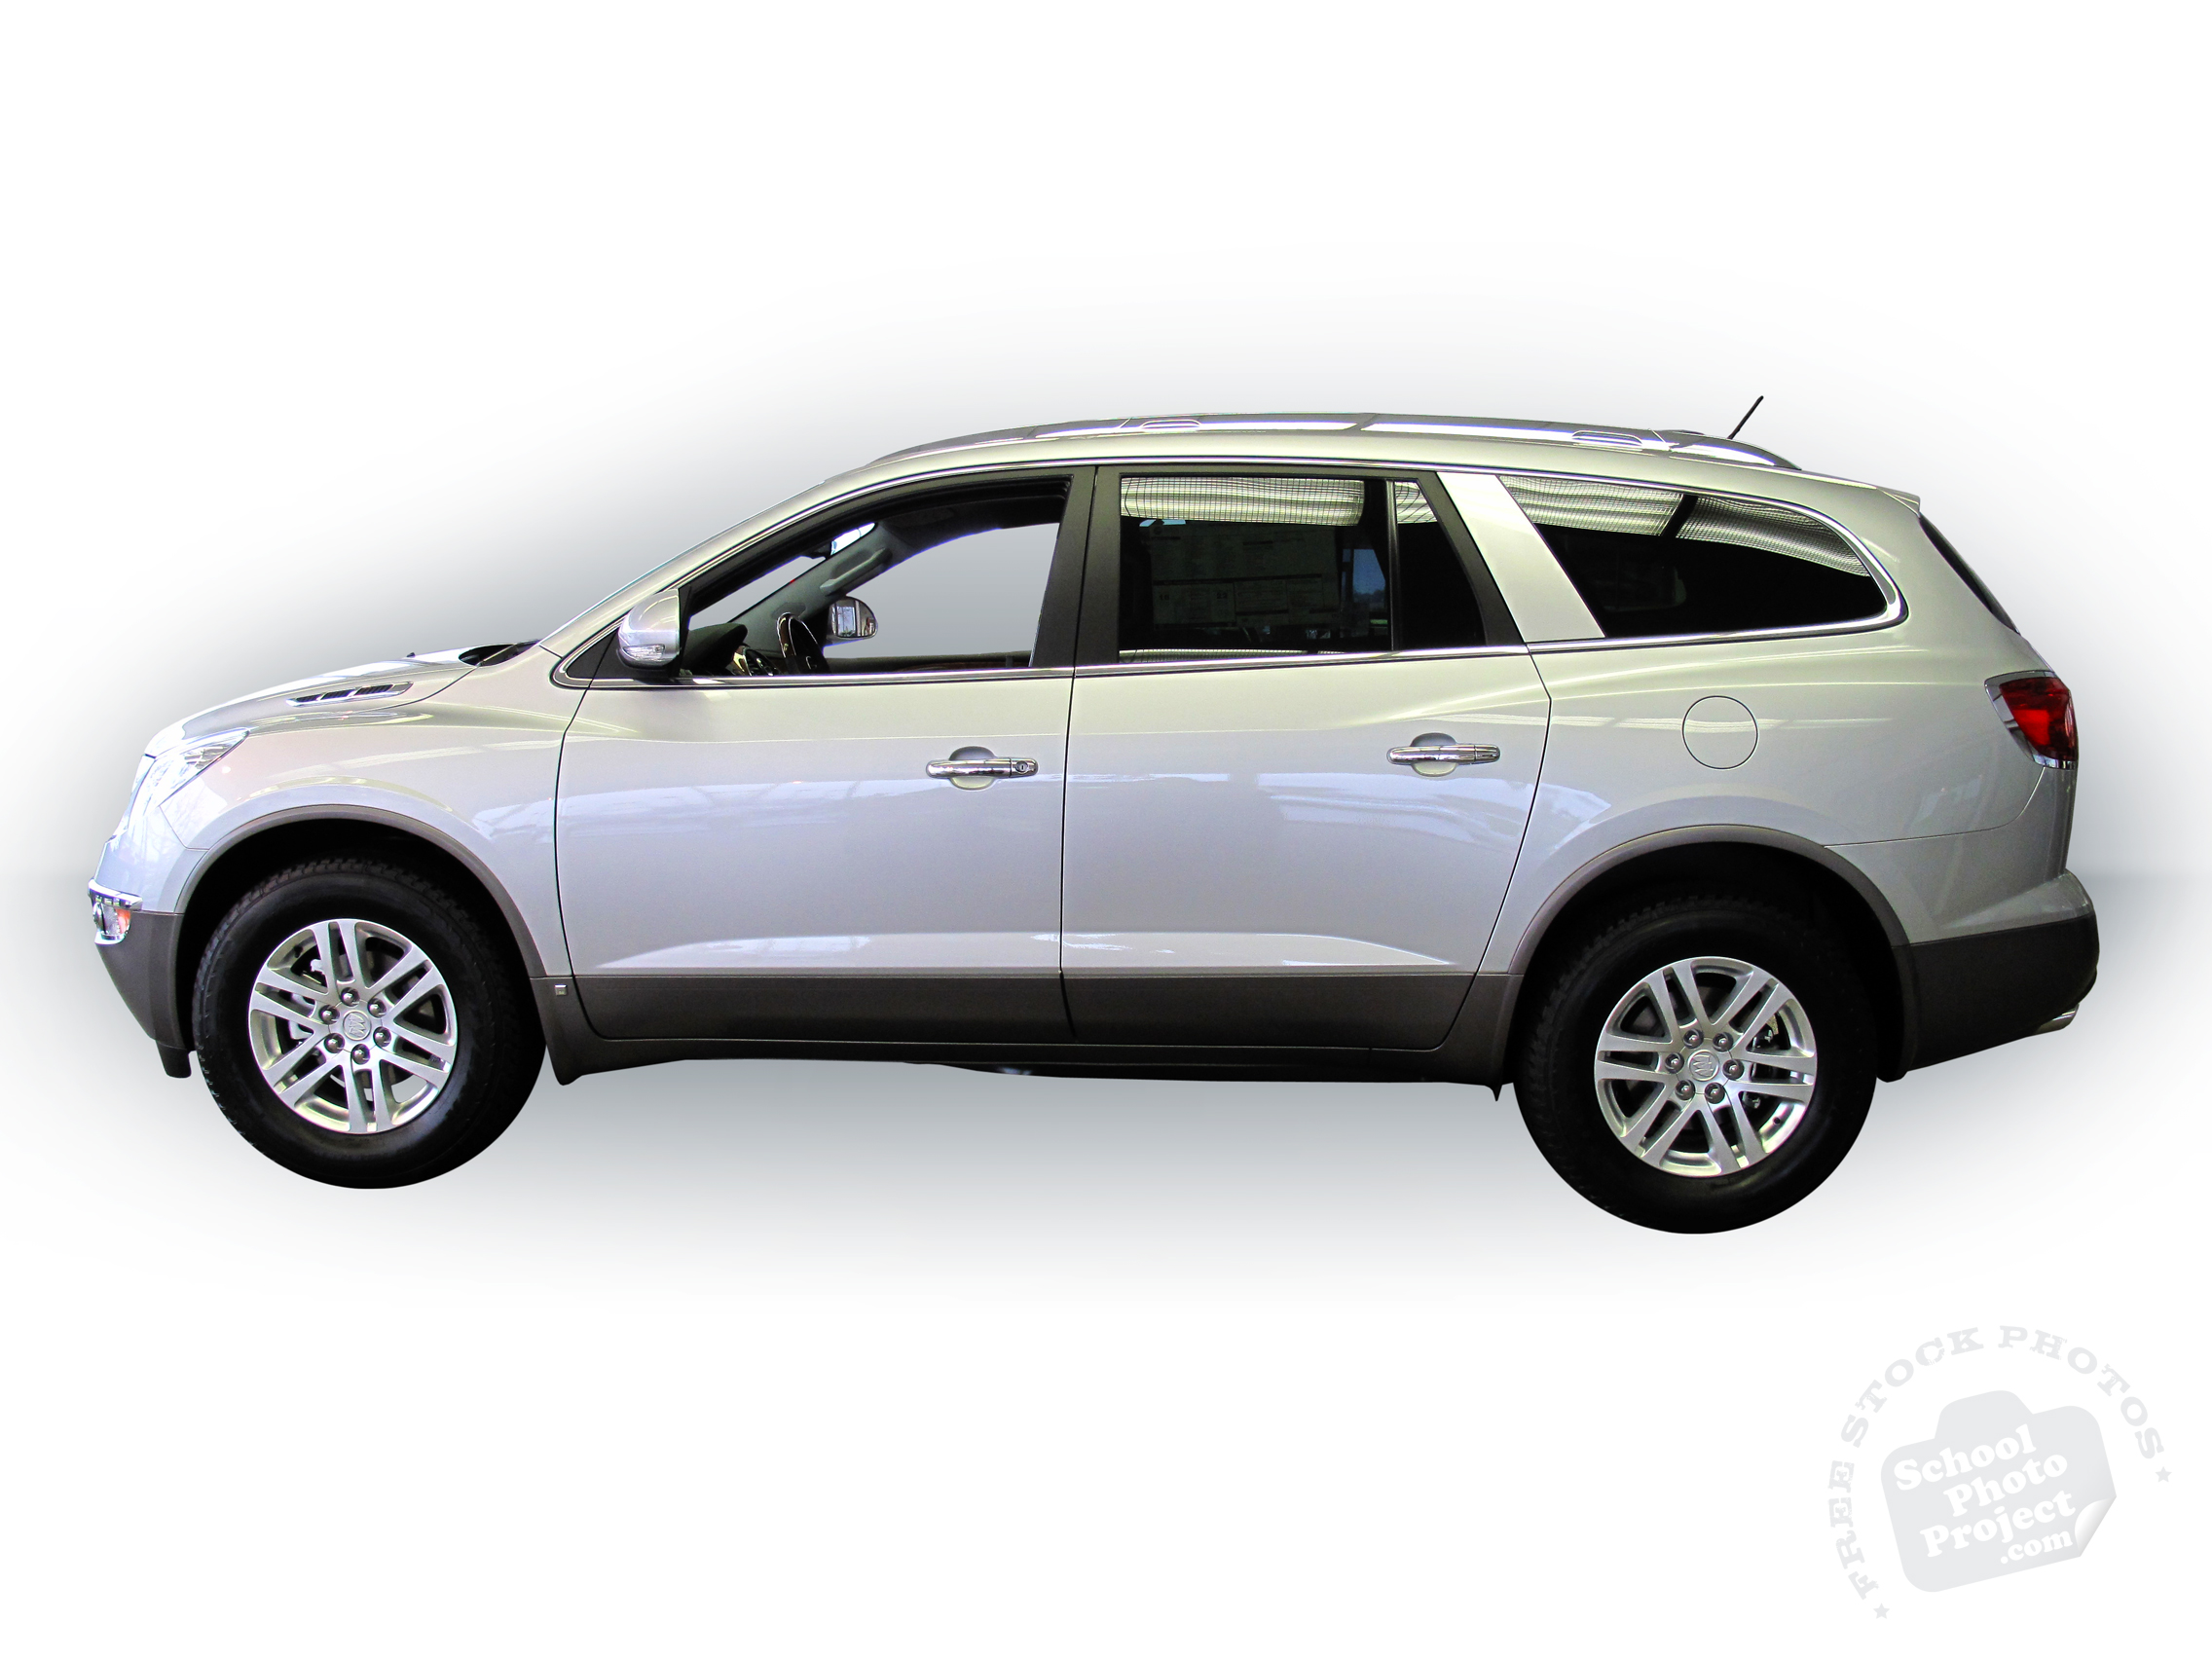 Buick Enclave, FREE Stock Photo, Image, Picture: Silver Buick ...